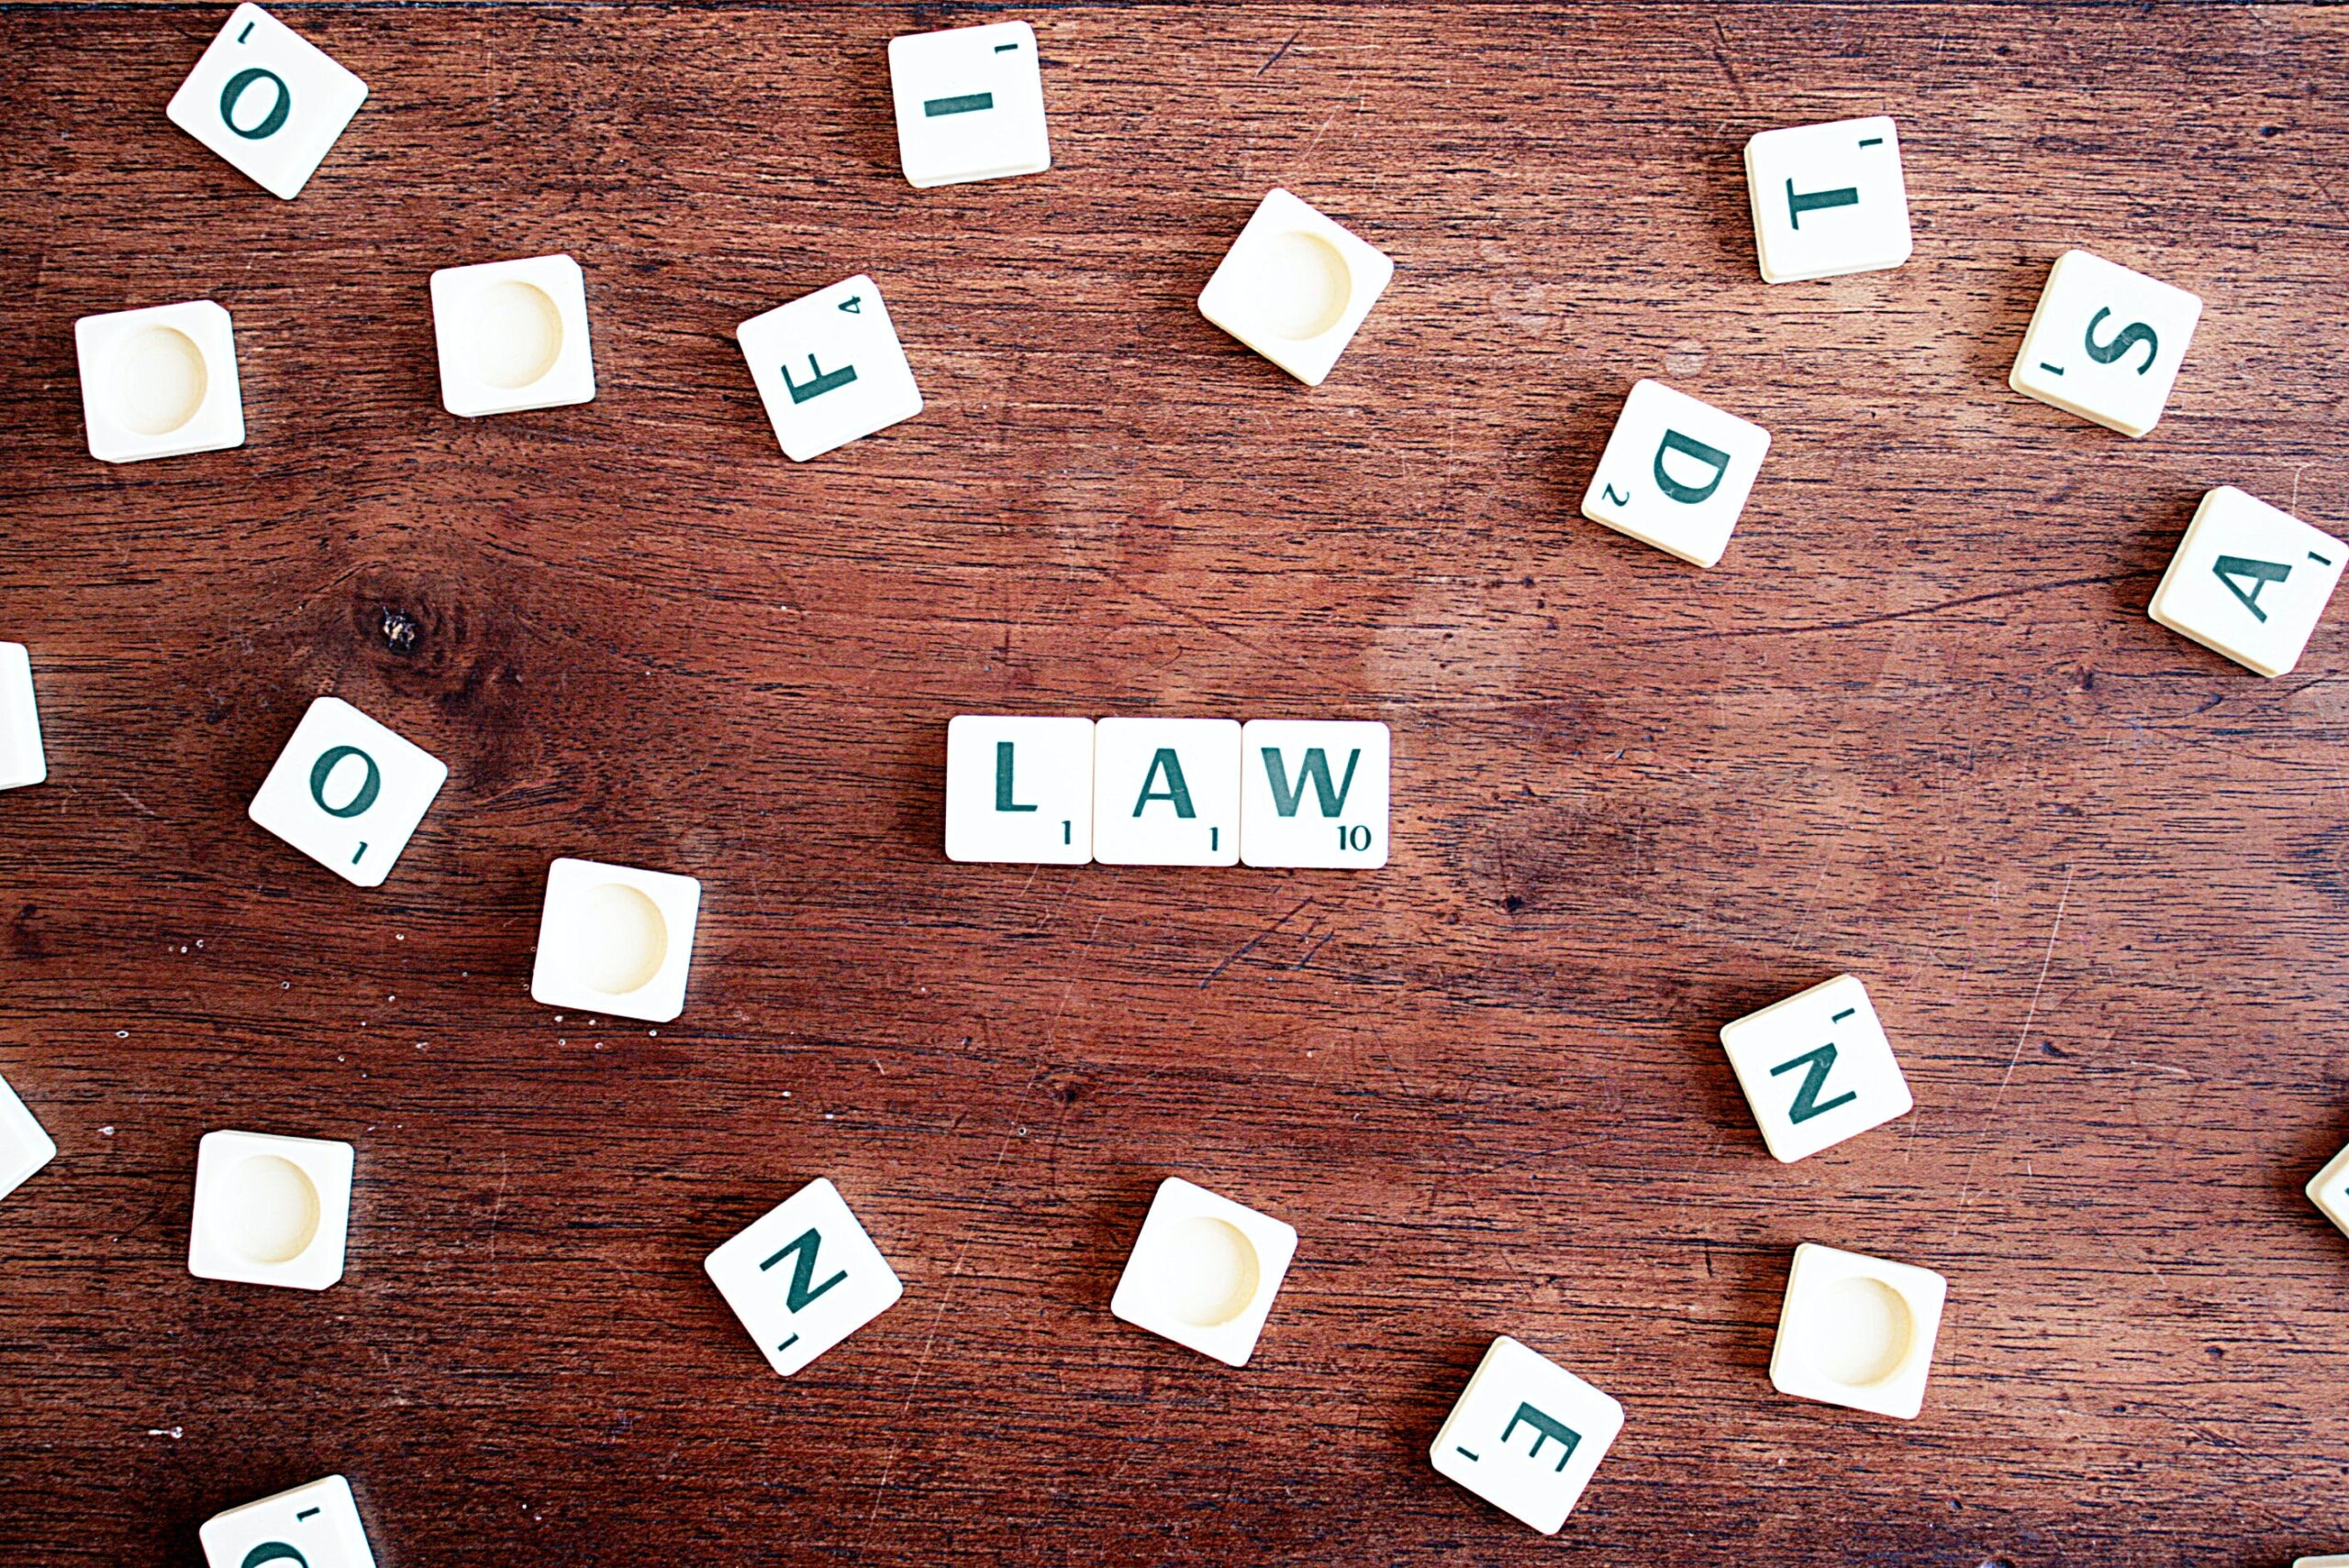 Employment Law 2021: Changes You Need to Know About